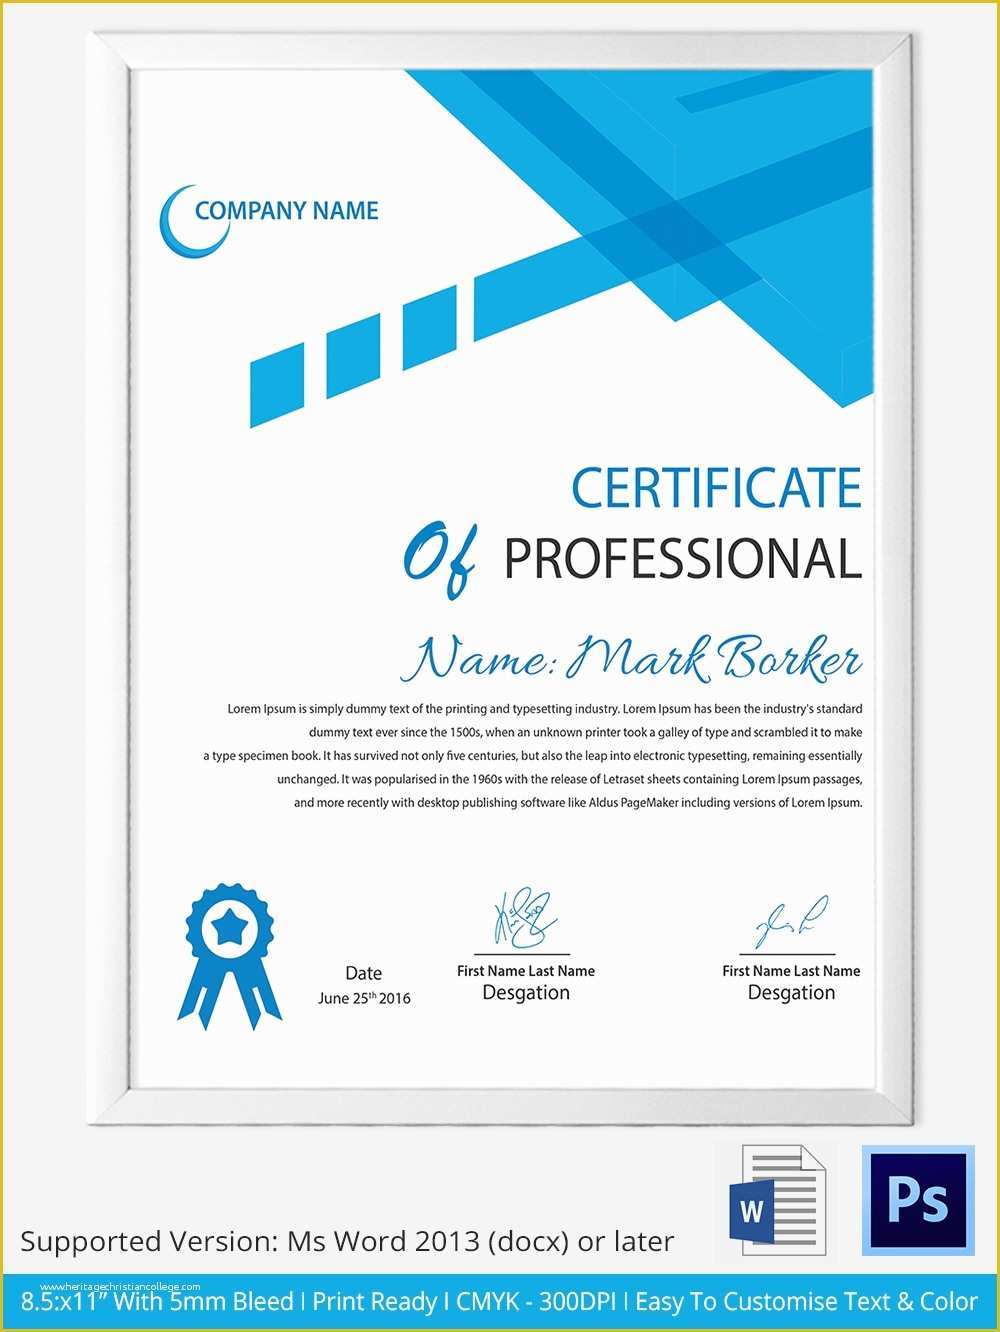 Free Psd Certificate Templates Download Of 33 Psd Certificate Templates – Free Psd format Download